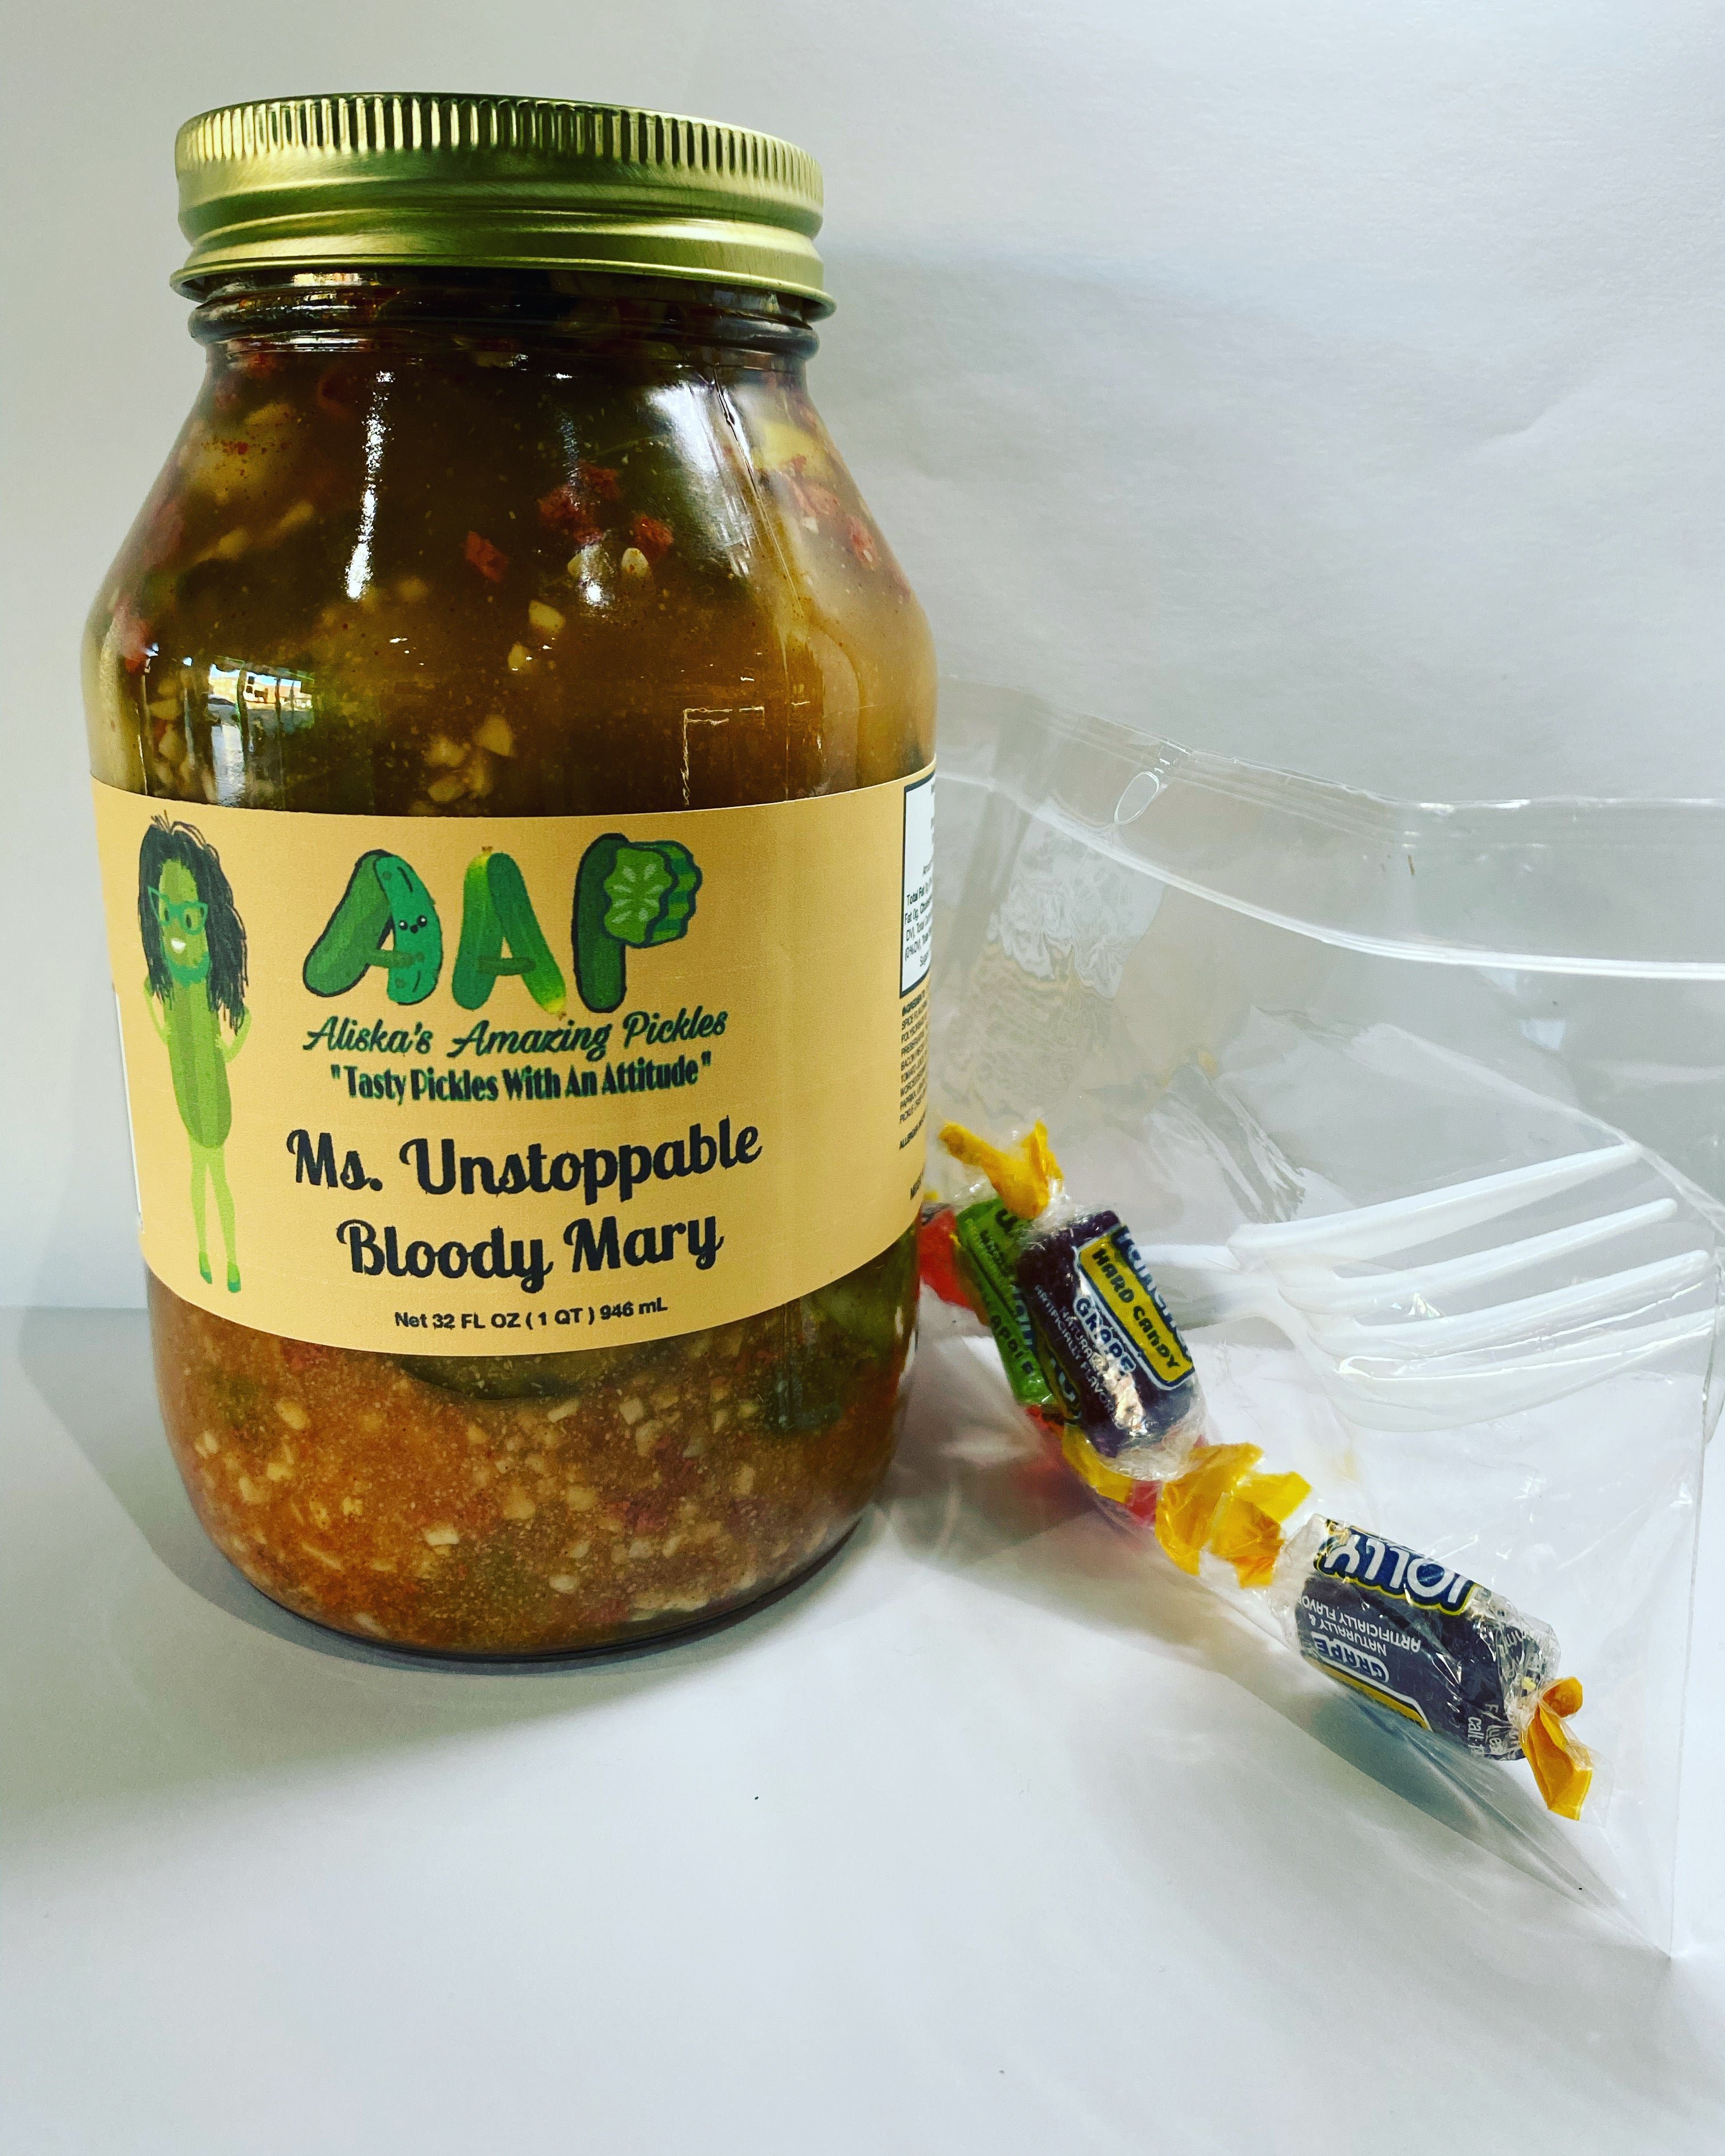 Ms. Unstoppable Bloody Mary Pickles